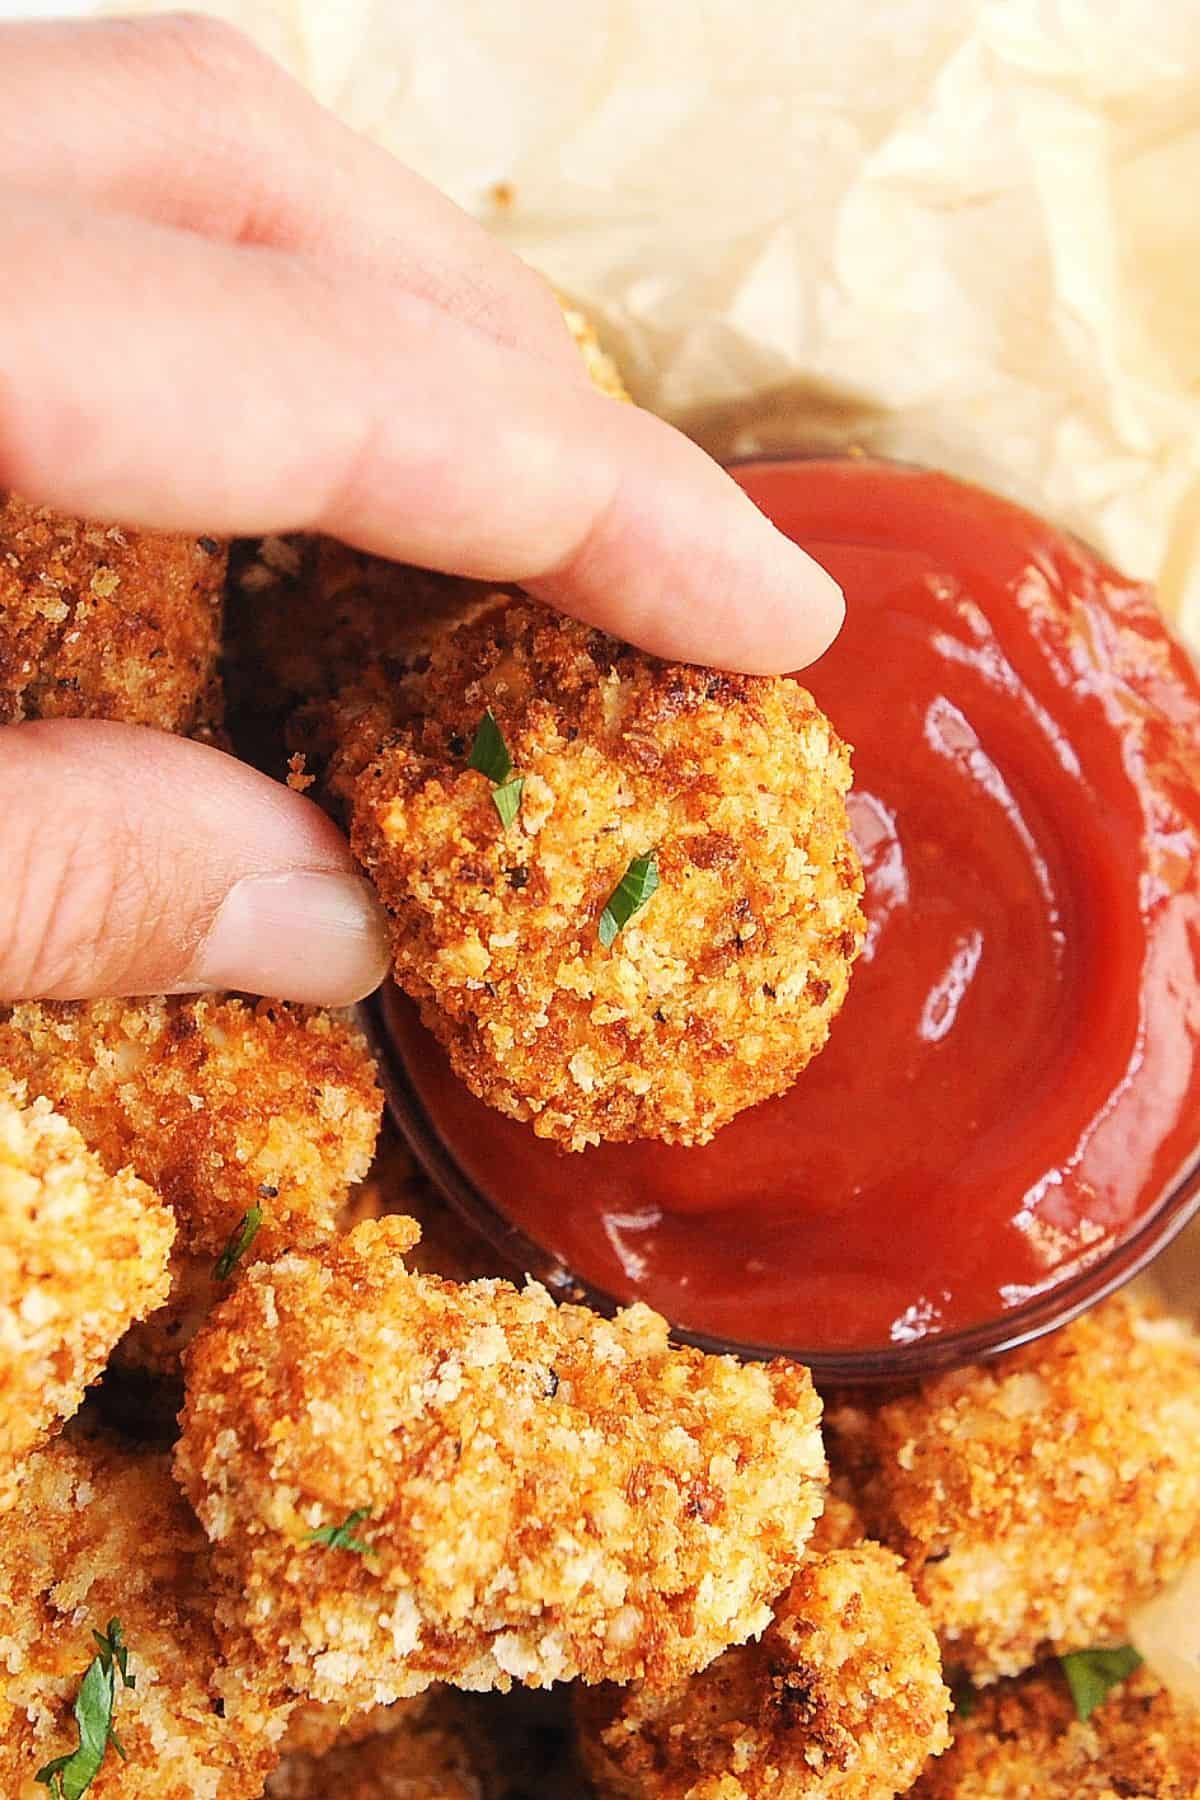 dipping air fried chicken nuggets in ketchup